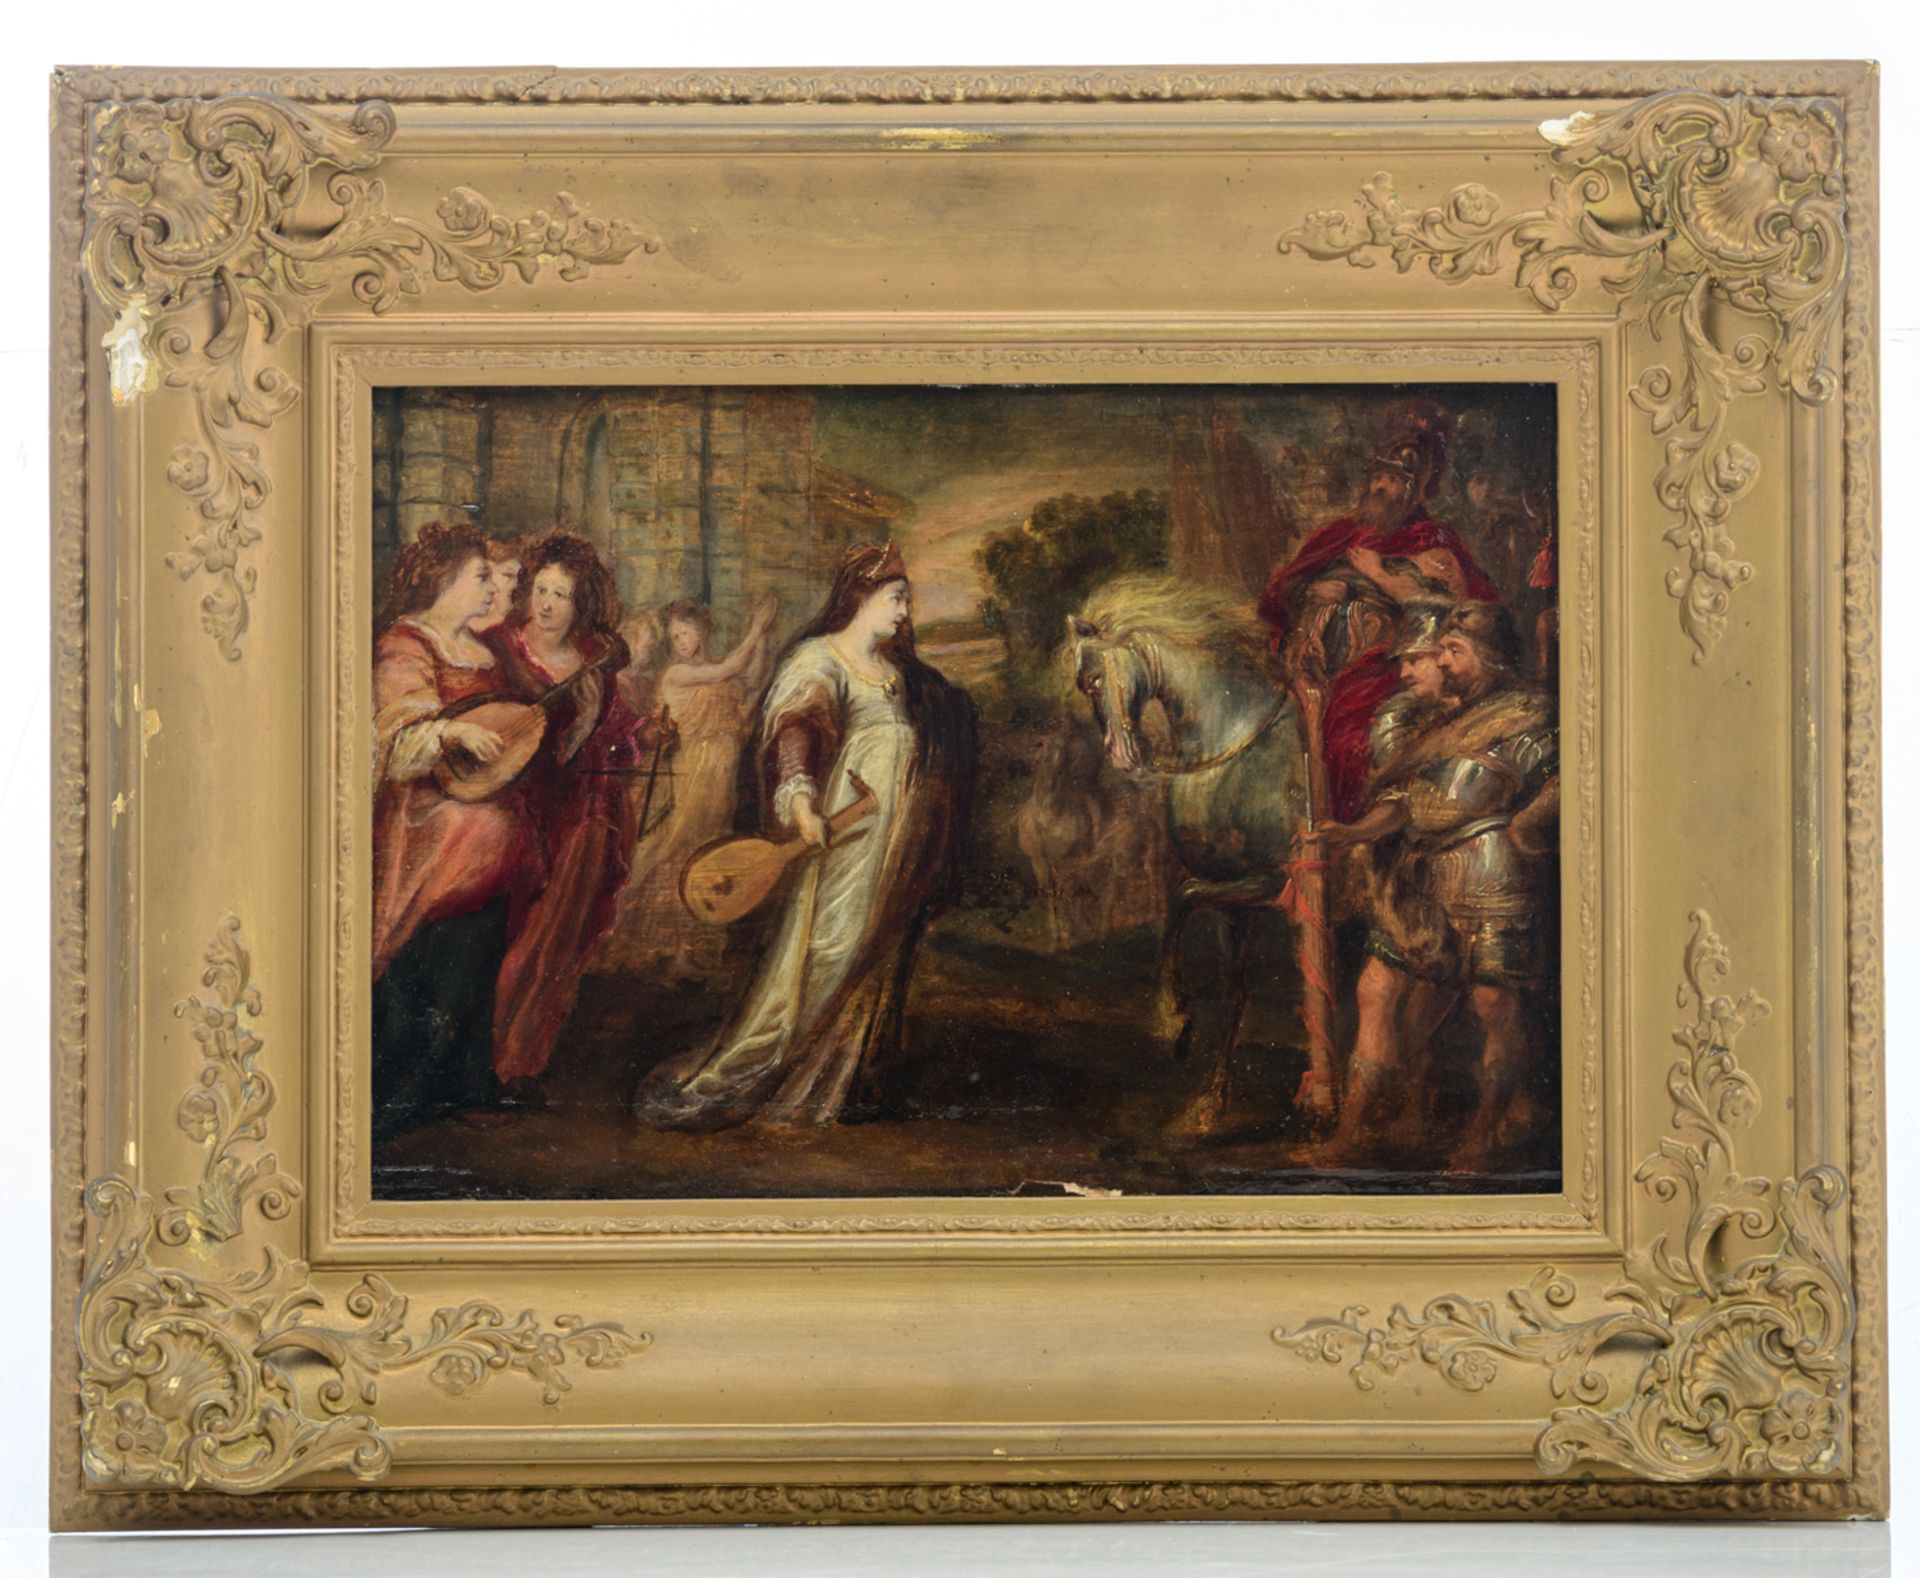 No visible signature, a Roman mythological scene, 17thC, oil on panel, 24 x 35 cm - Image 2 of 6